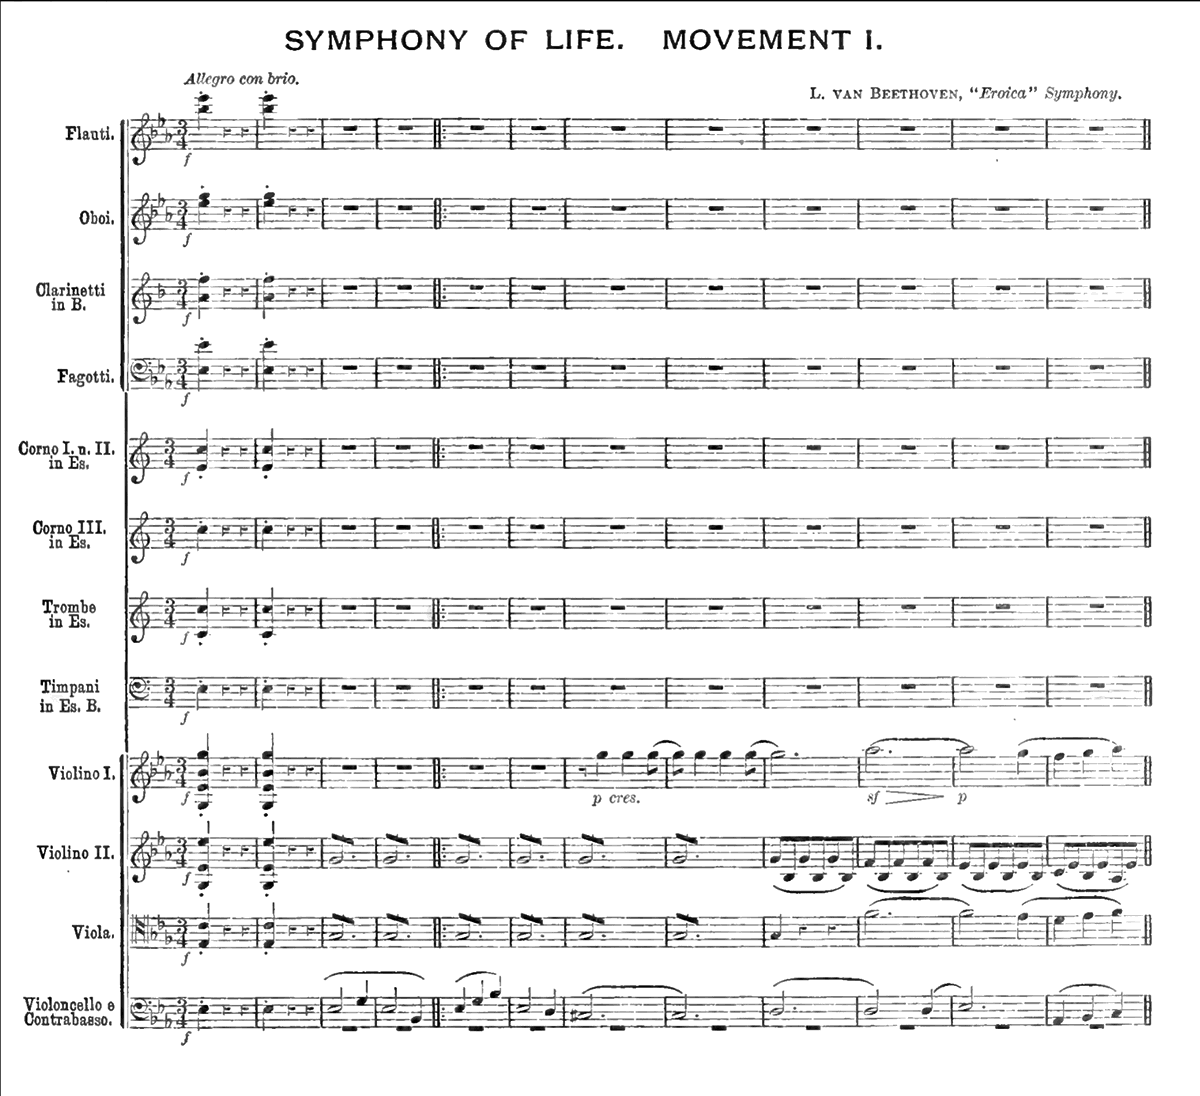 {Symphony of Life, Movement 1. The first page of the score of the first movement, Allegro con brio, of Beethoven}